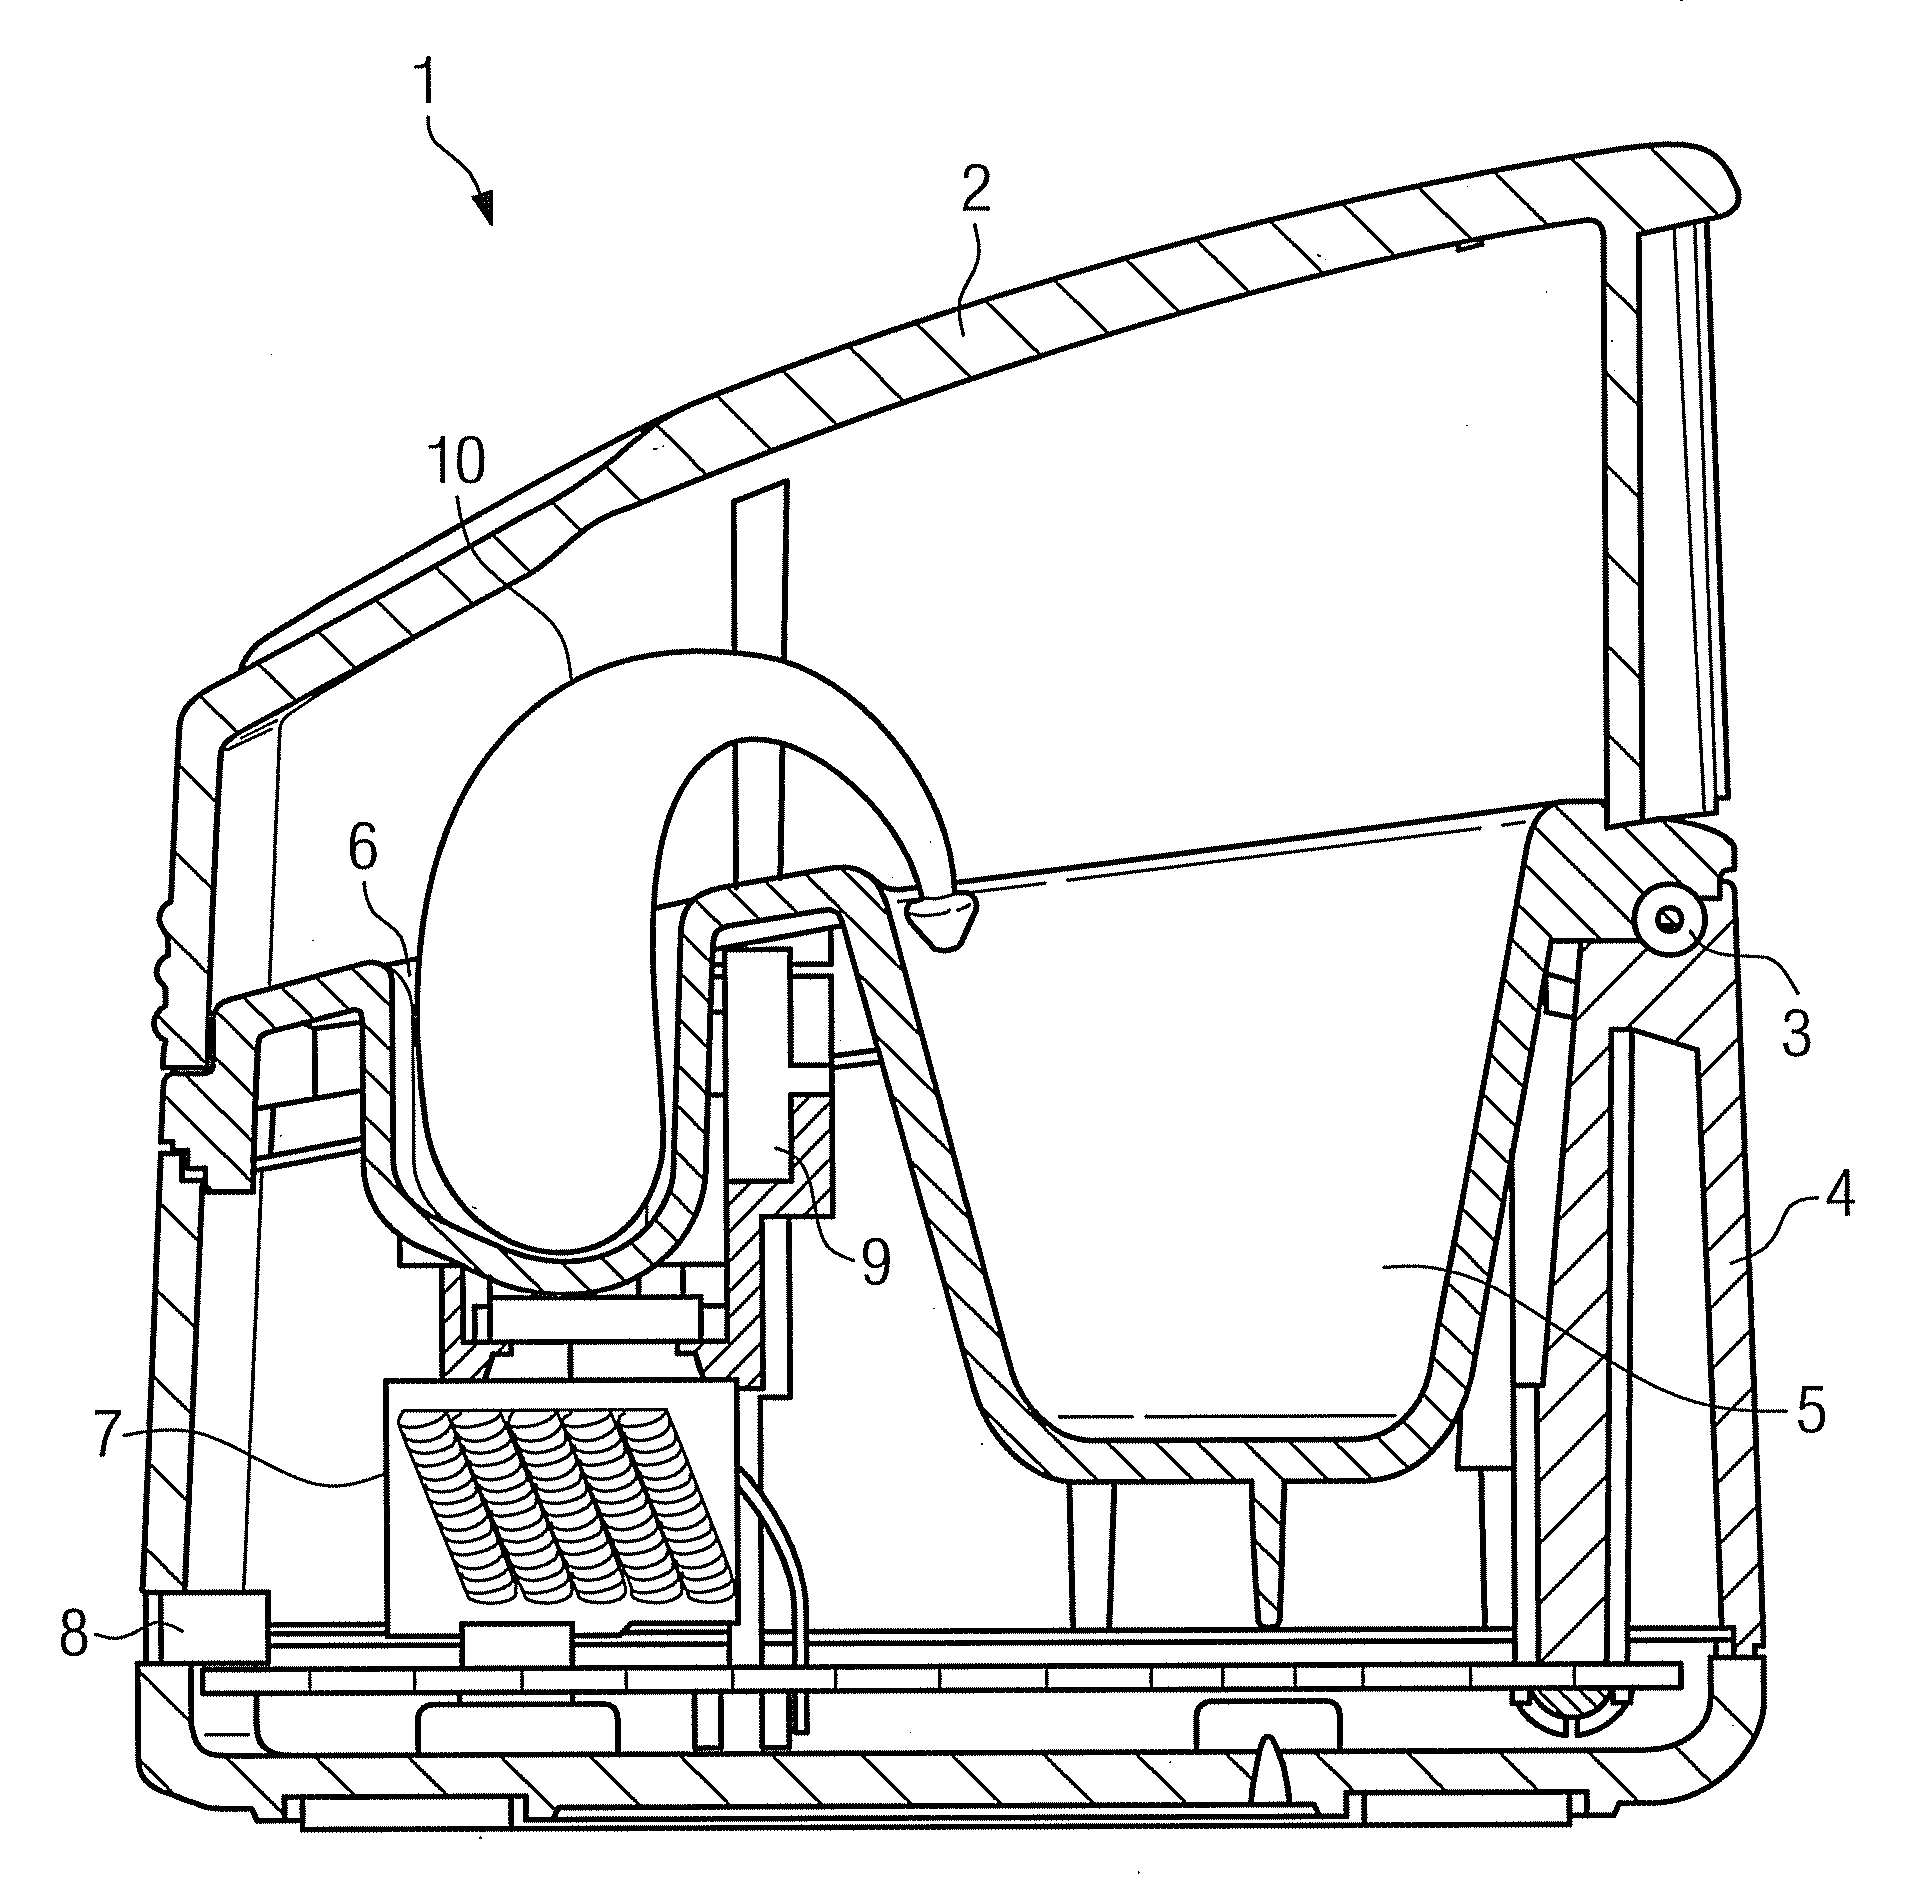 Apparatus for drying hearing aids